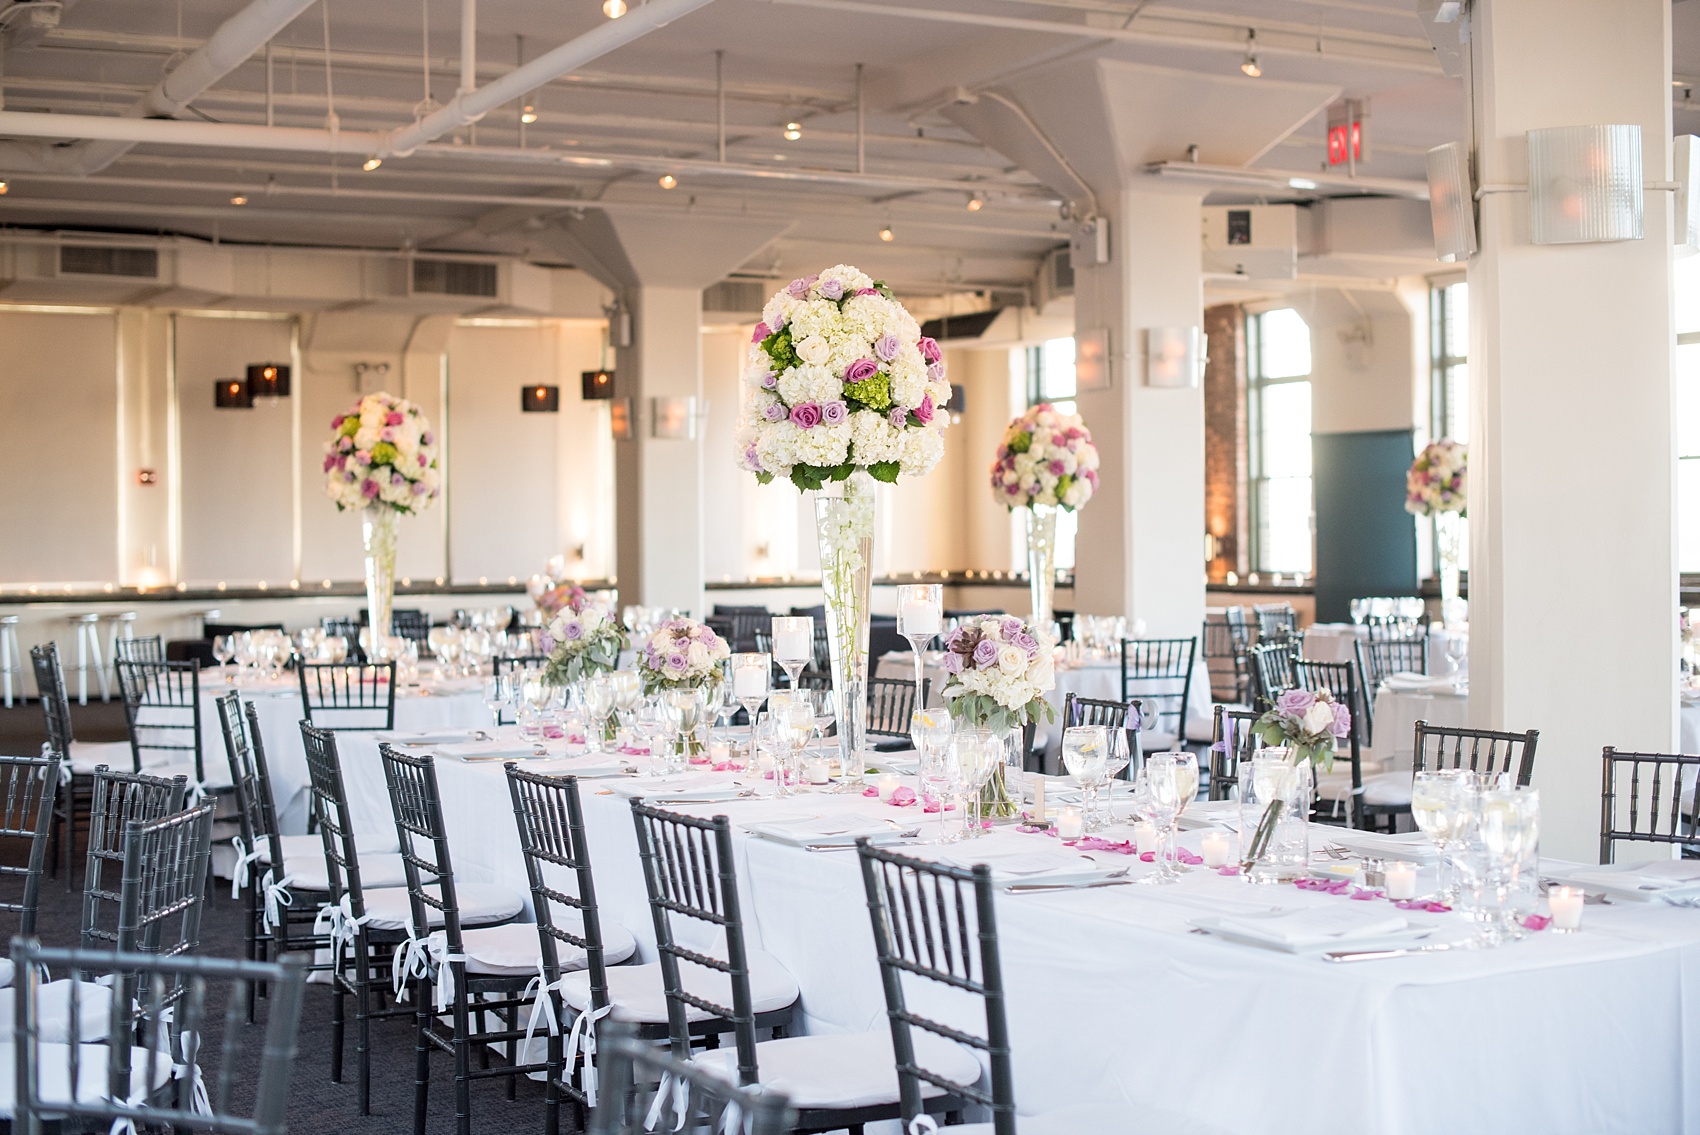 Mikkel Paige Photography photos of a NYC wedding at Tribeca Rooftop. An image of the reception with candlelight and purple flowers.